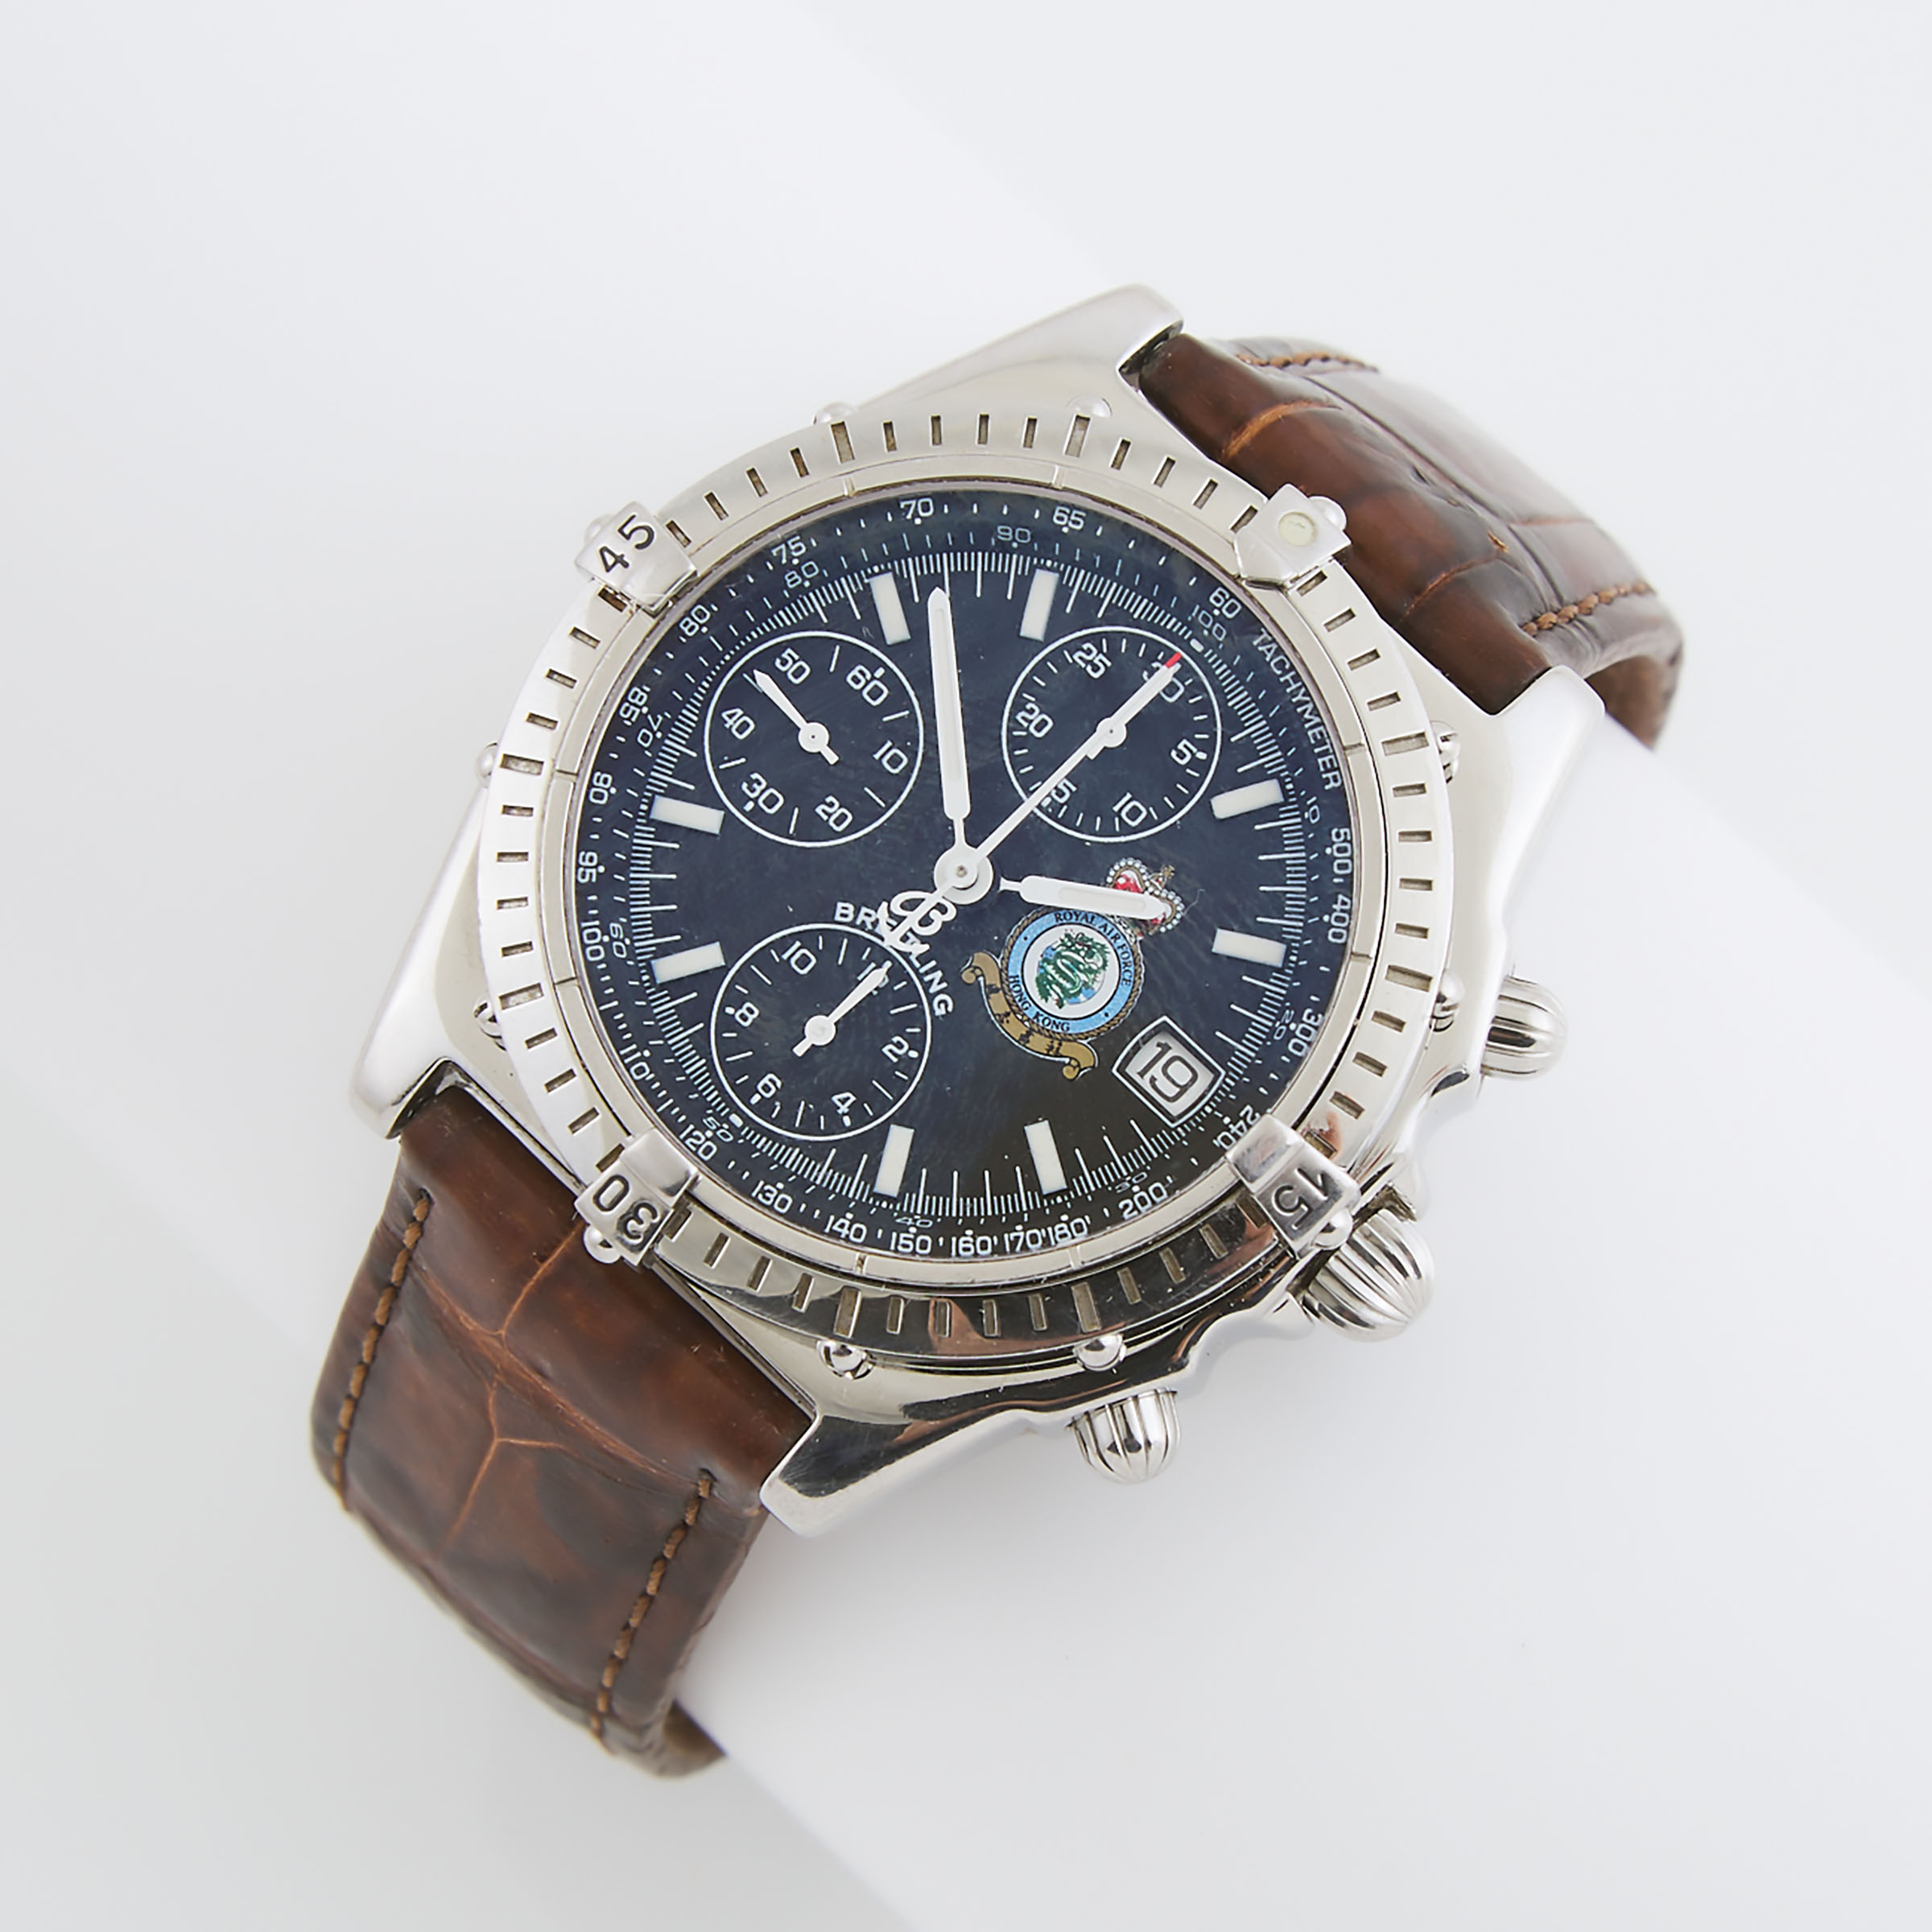 Breitling Chronomat 'Royal Air Force - Hong Kong' Wristwatch With Date And Chronograph